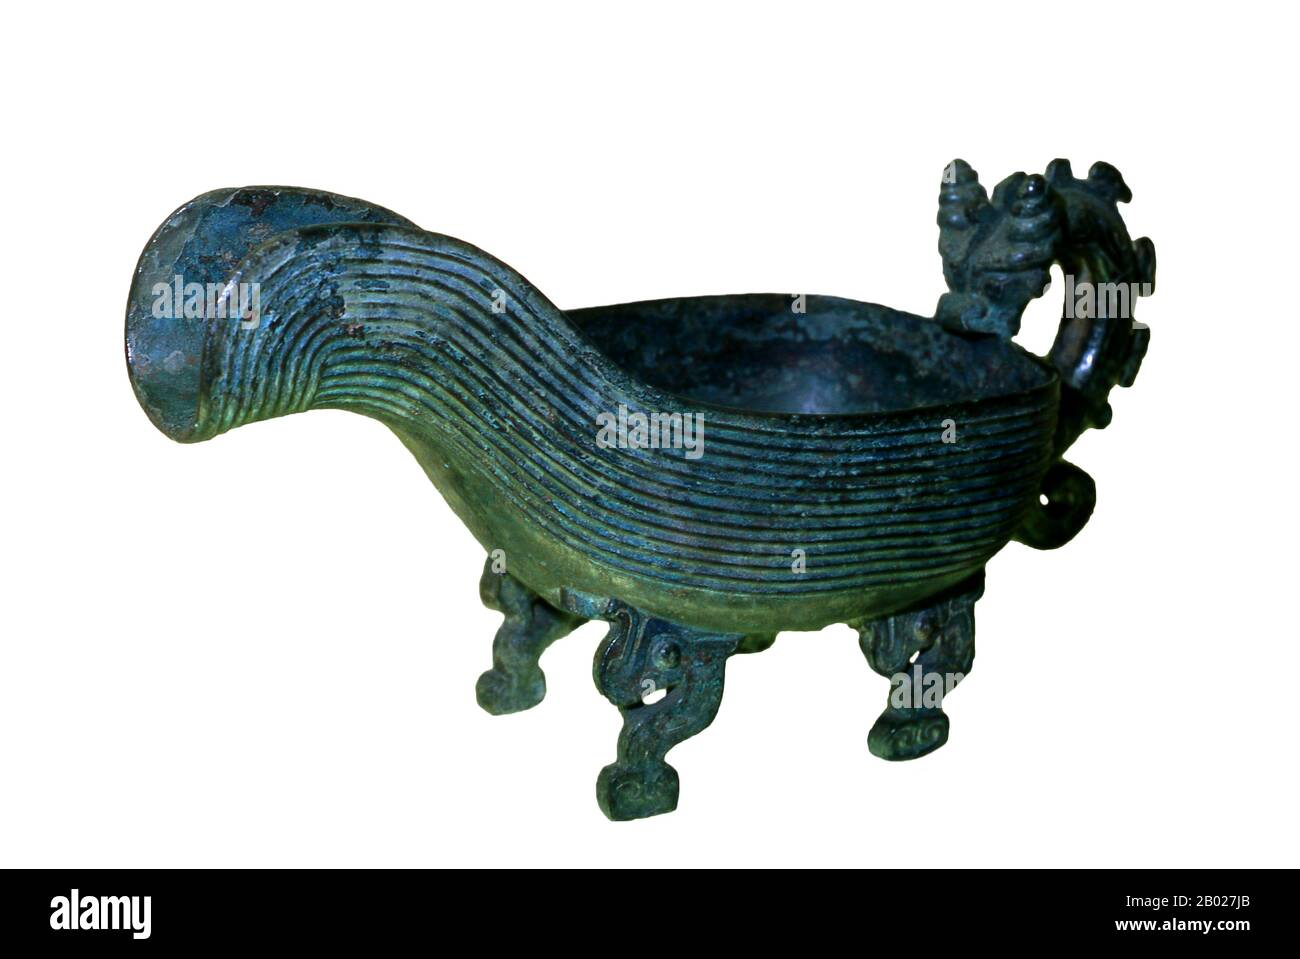 A yi (Chinese: 匜; pinyin: yí) is a shape used in ancient Chinese ritual bronzes. It has the shape of half a gourd with a handle (often in the shape of a dragon) and usually supported by four legs. It is believed it was used to contain water for washing hands before rituals like sacrifices. Stock Photo